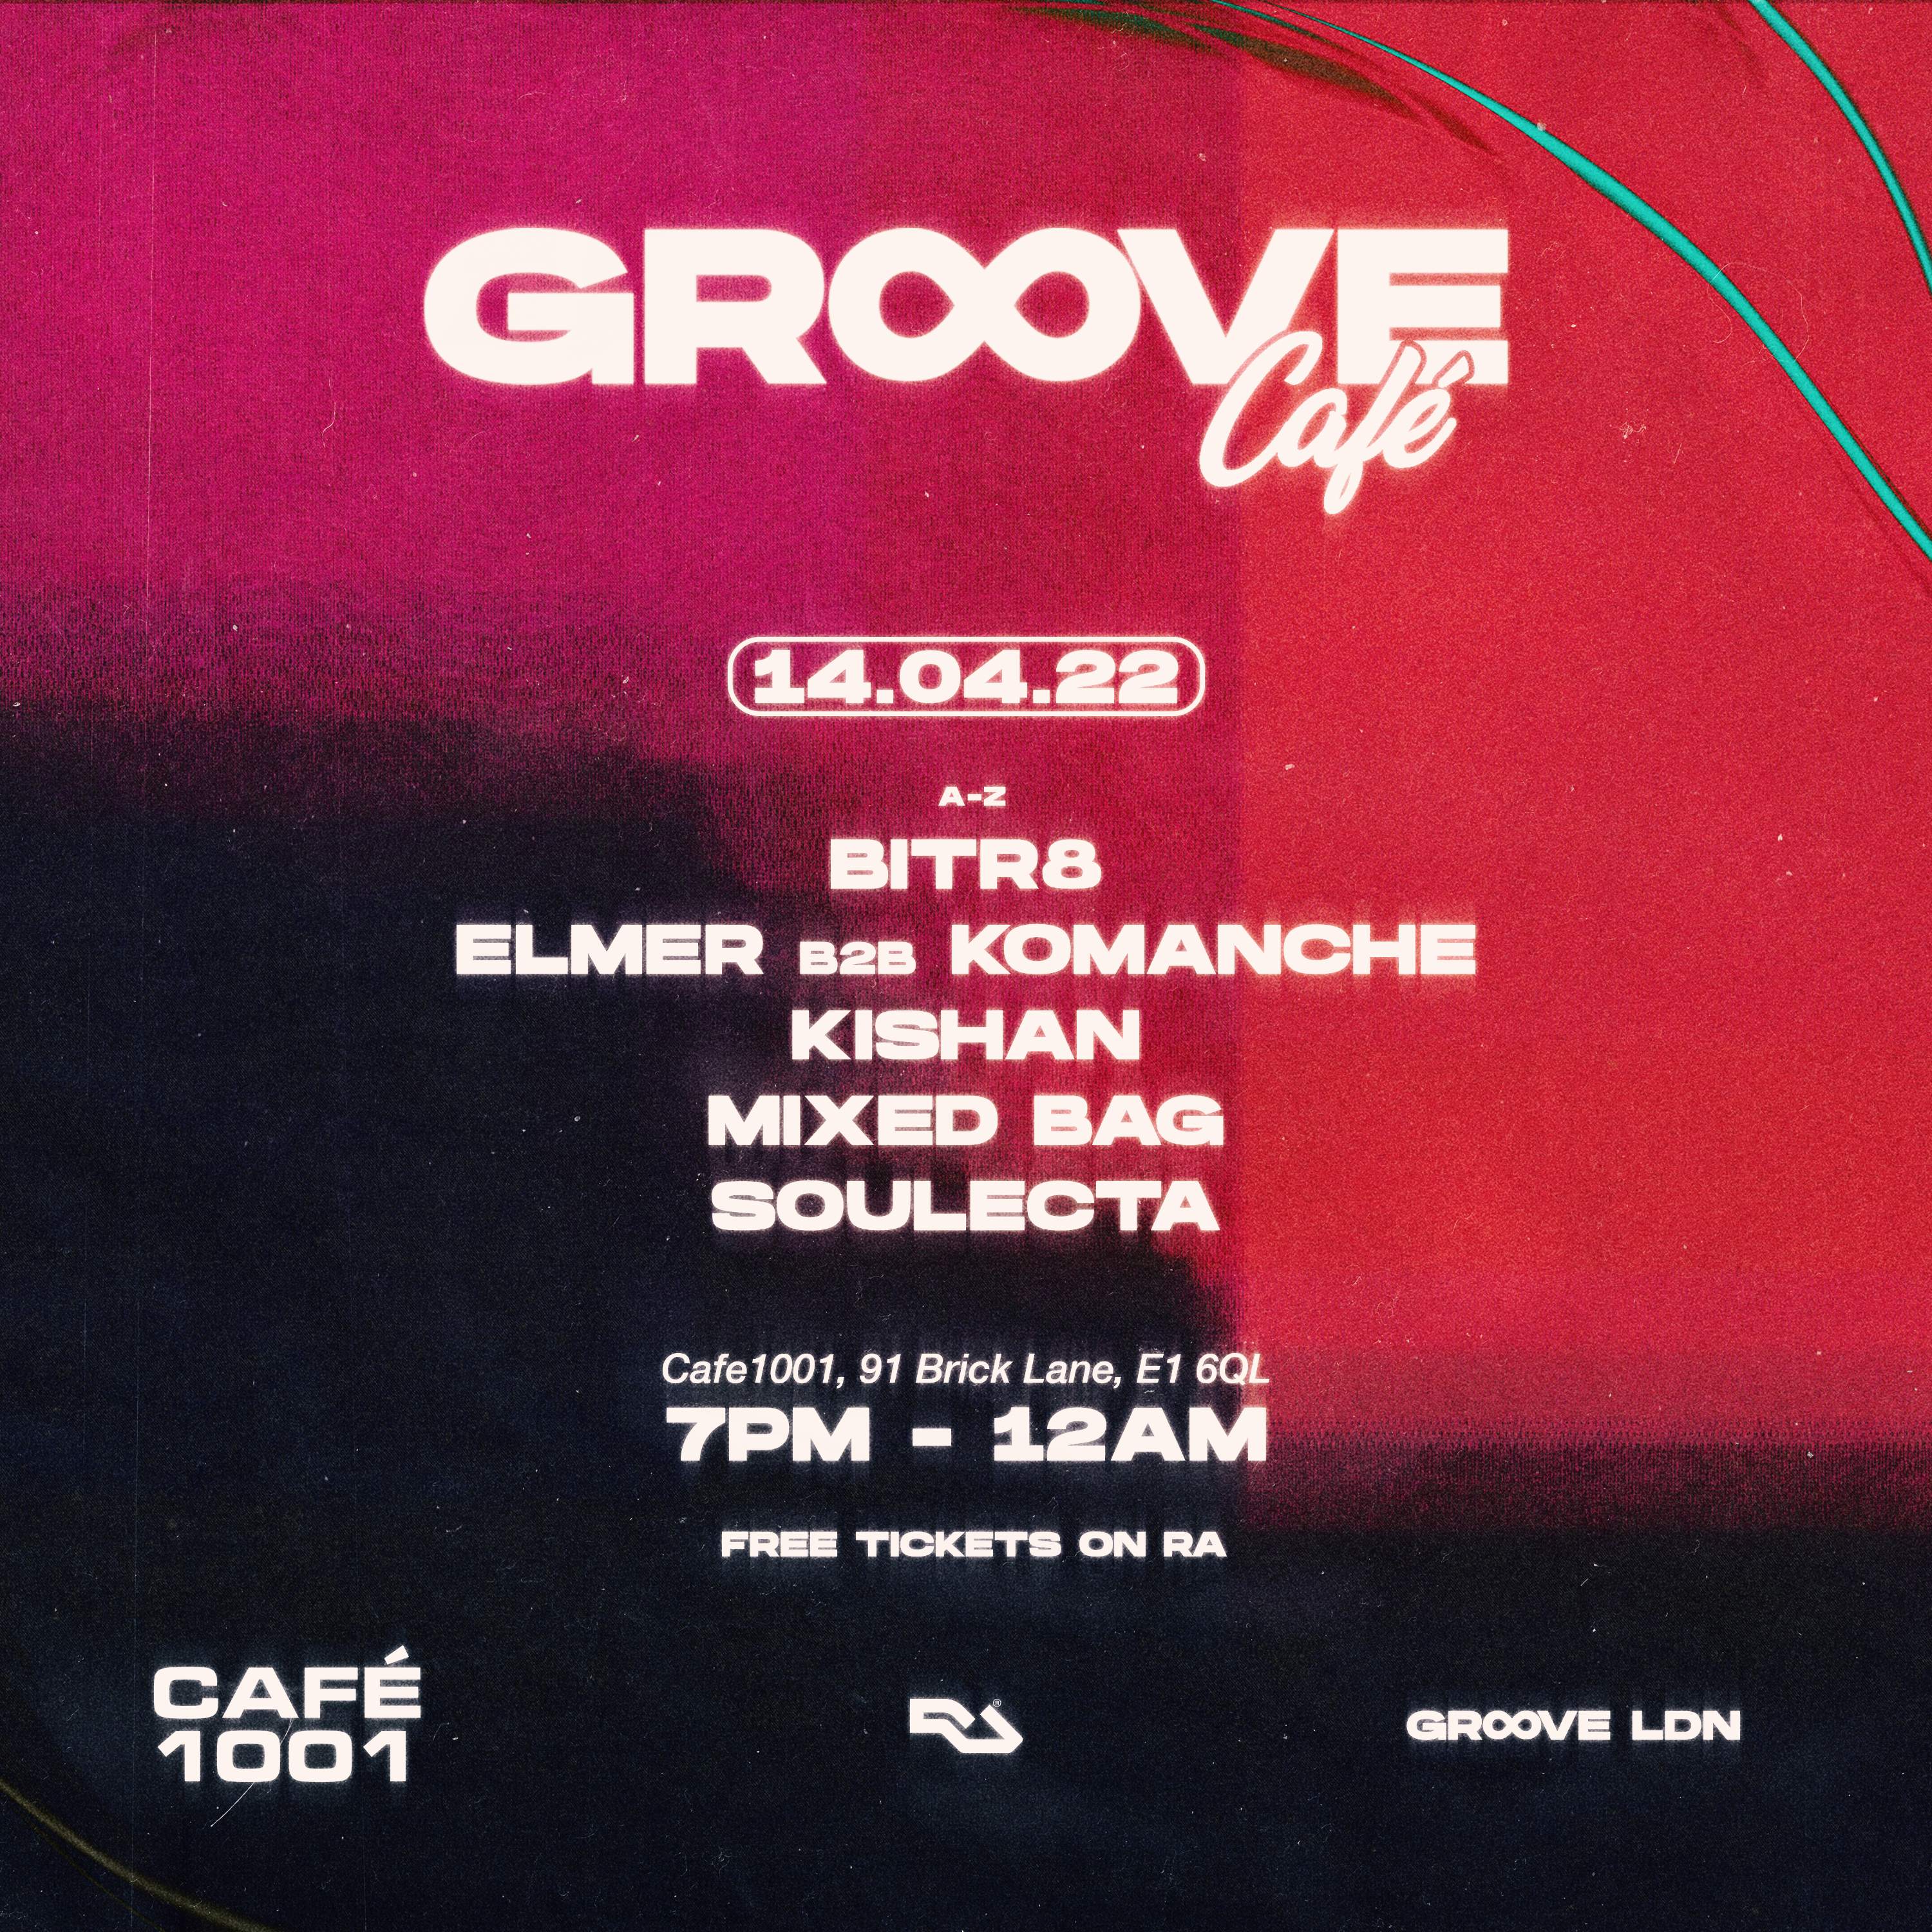 Groove Café with Bitr8, Soulecta + more - フライヤー表